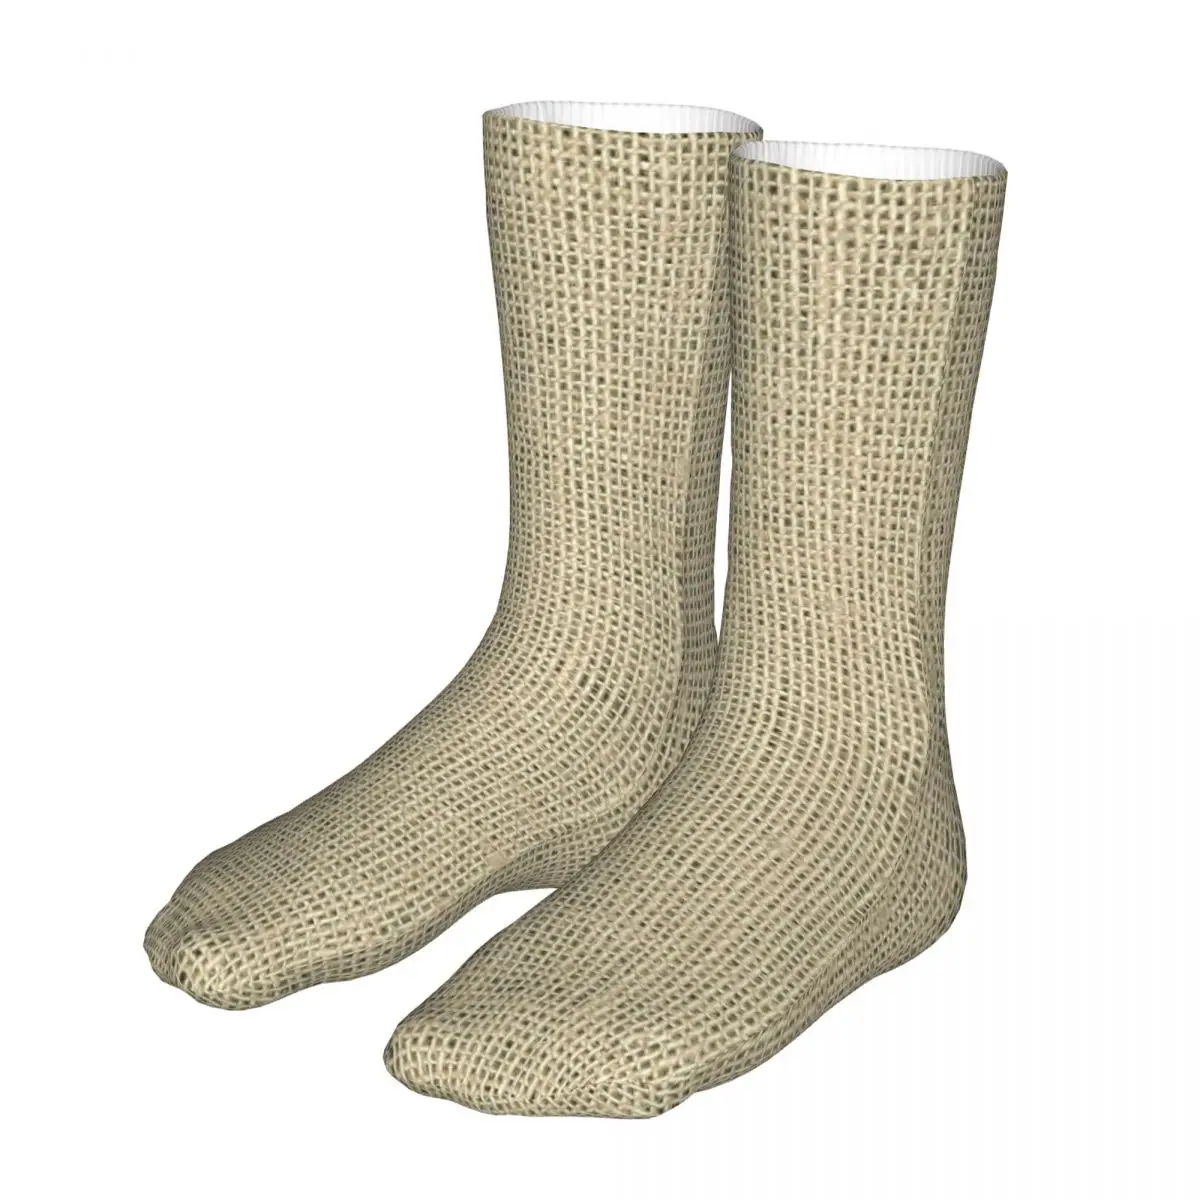 

Rustic Burlap Farm Style Texture Socks Men's Women's Casual Abstract Stripes Socks High Quality Spring Autumn Winter Socks Gifts